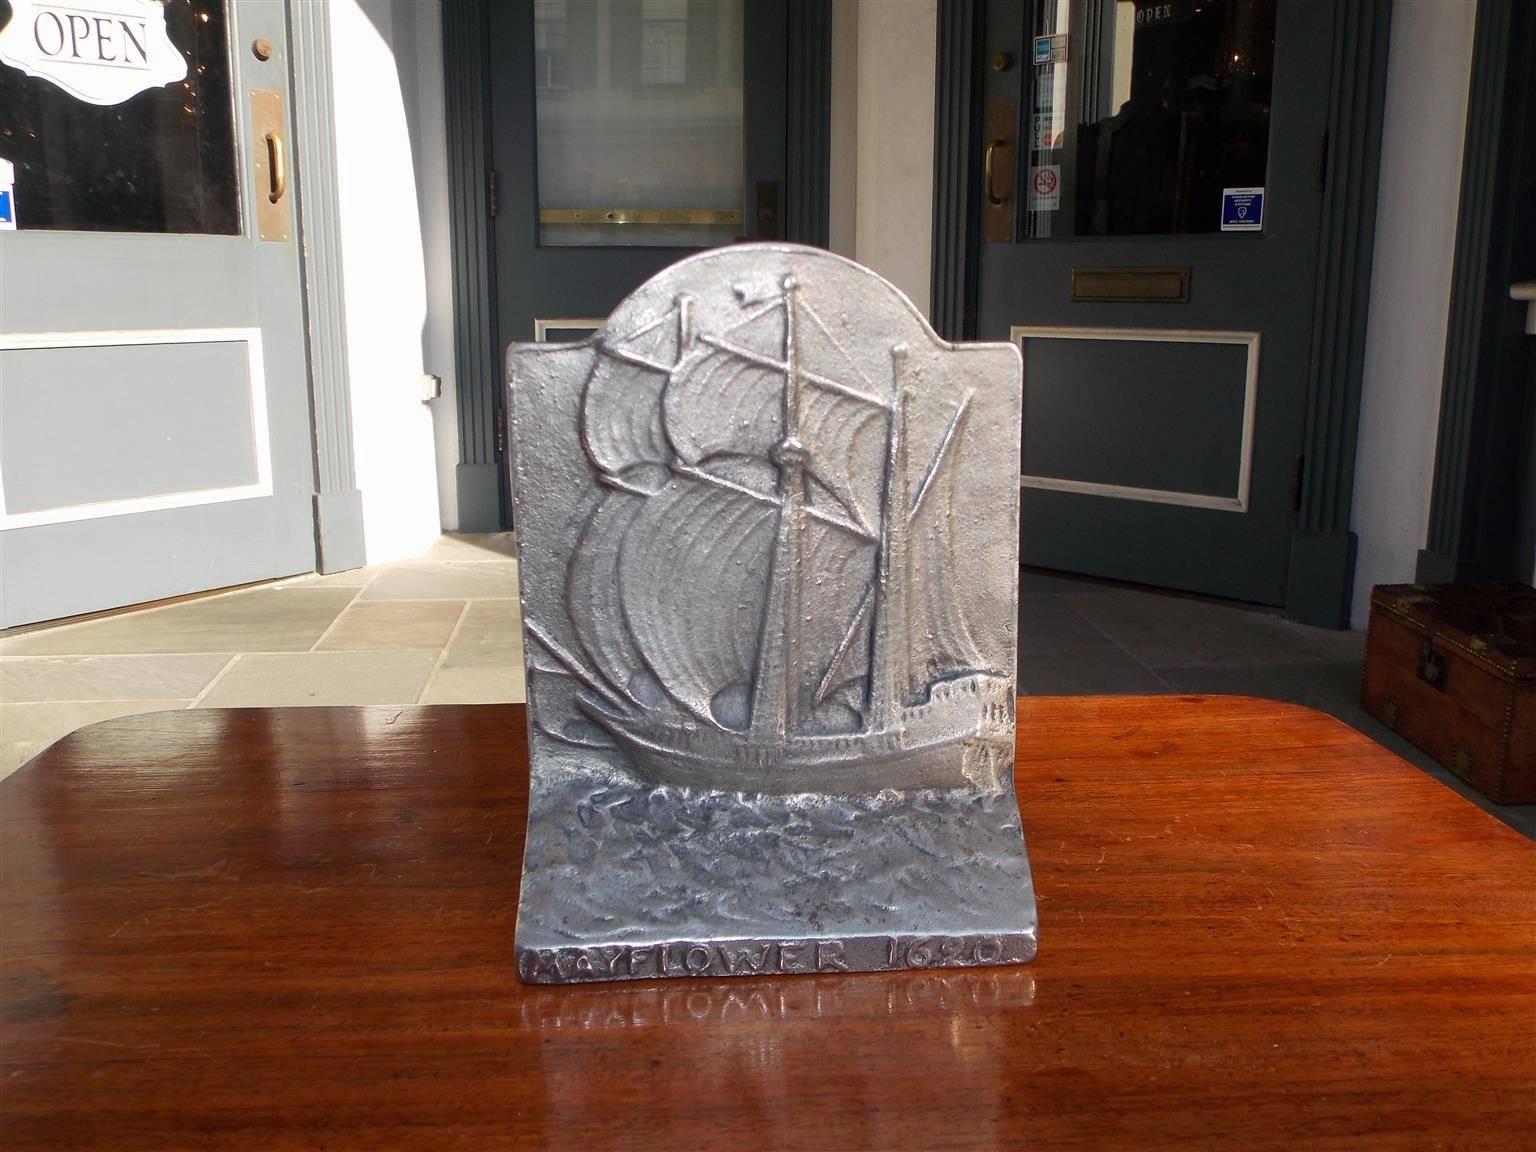 American cast iron Mayflower arched doorstop with sailing vessel on rough seas. Signed on lower base, mayflower, 1620. Late 19th Century.